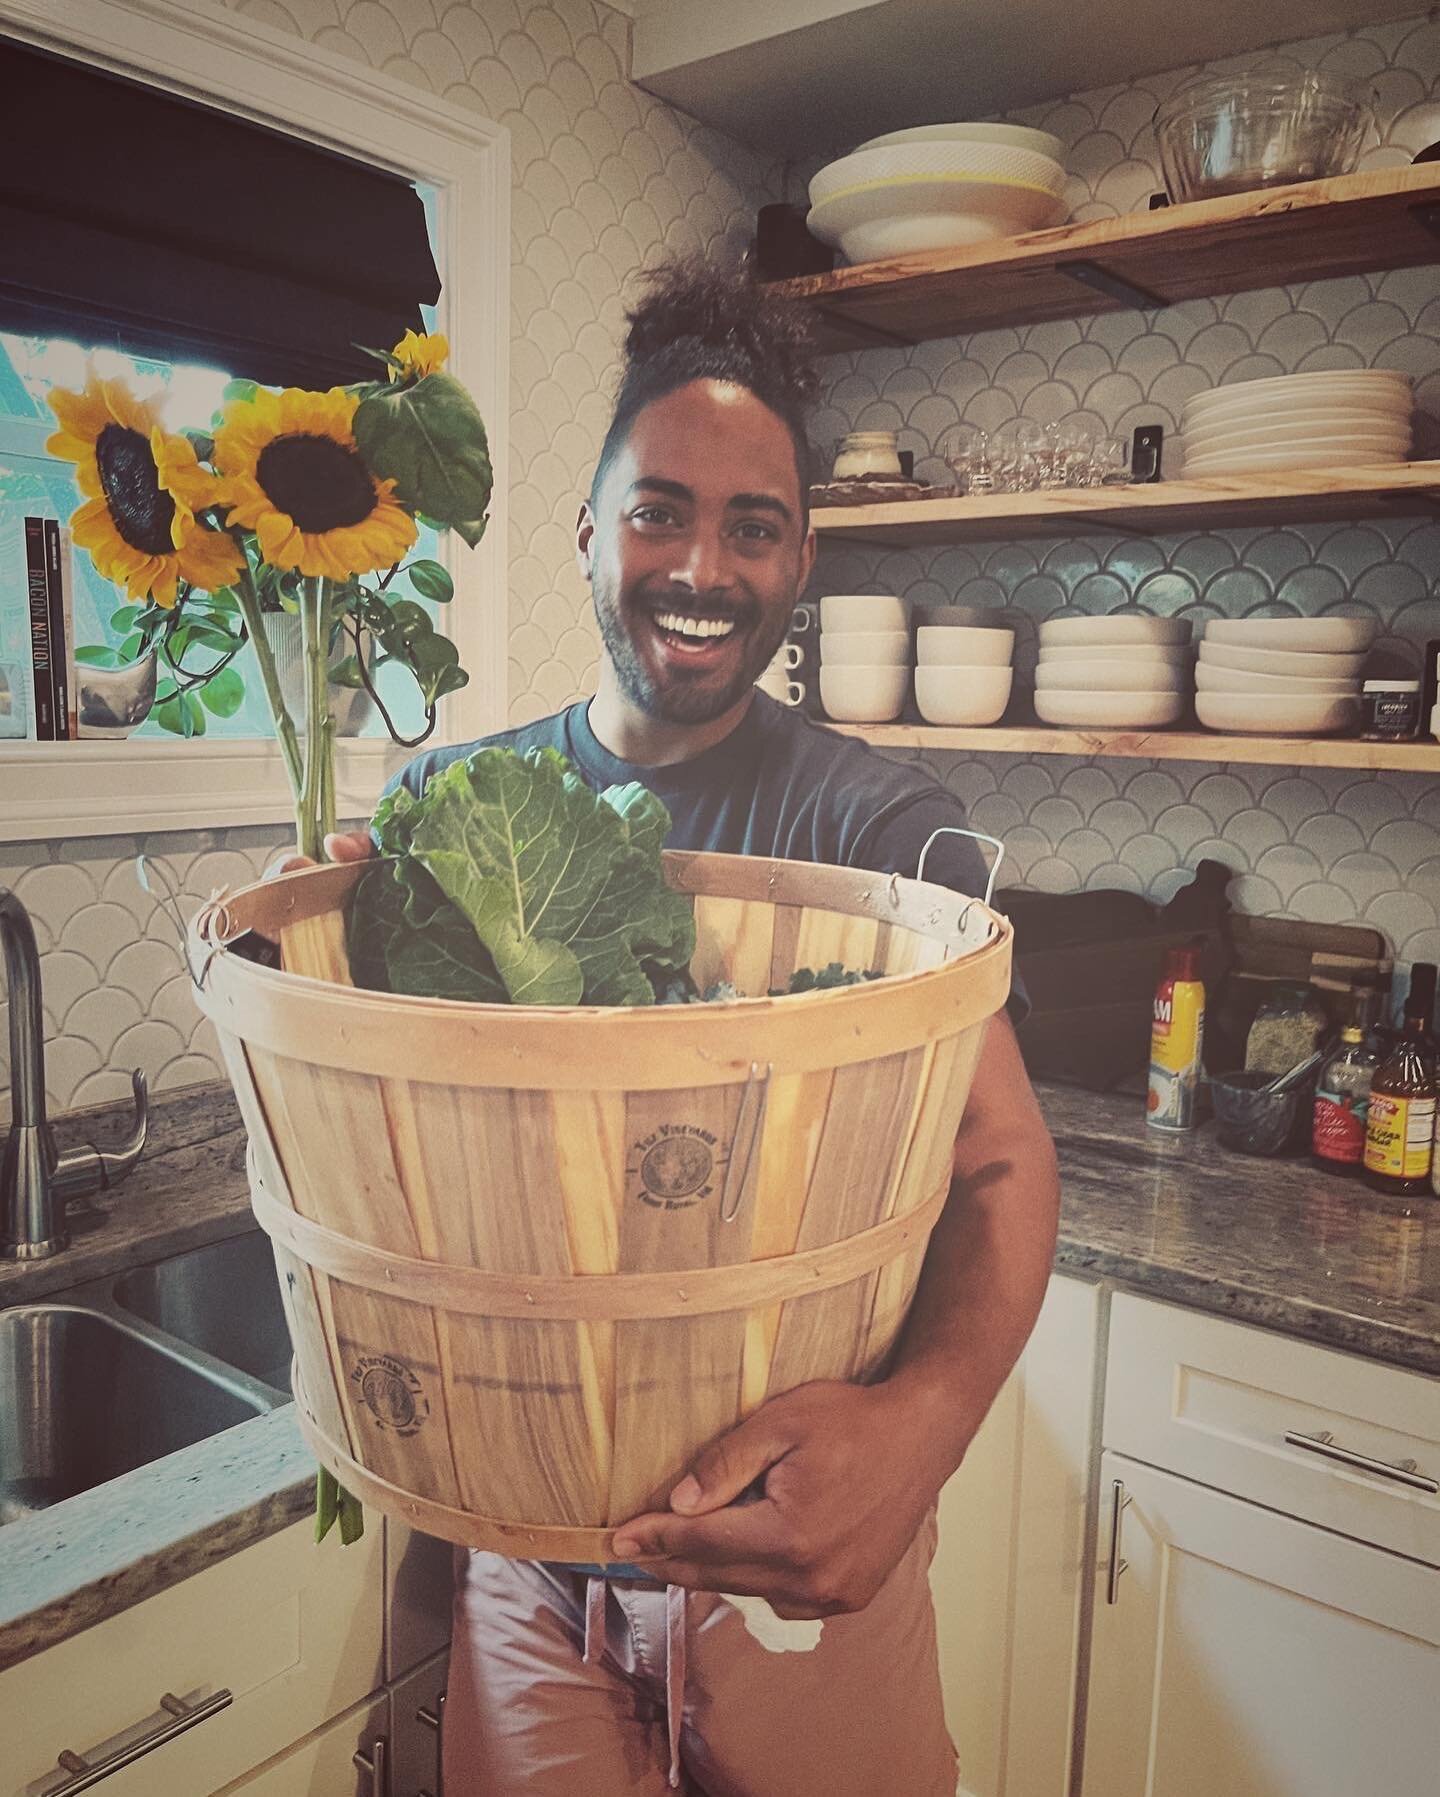 Ding dong! Our first CSA delivery was a hit!! Check out our happy customers and the  delicious meals they made😍
.
.
.
#localfood #farmfresh #vegan #virginia #dc #womanownedbusiness #lgbtowned #smallbusiness